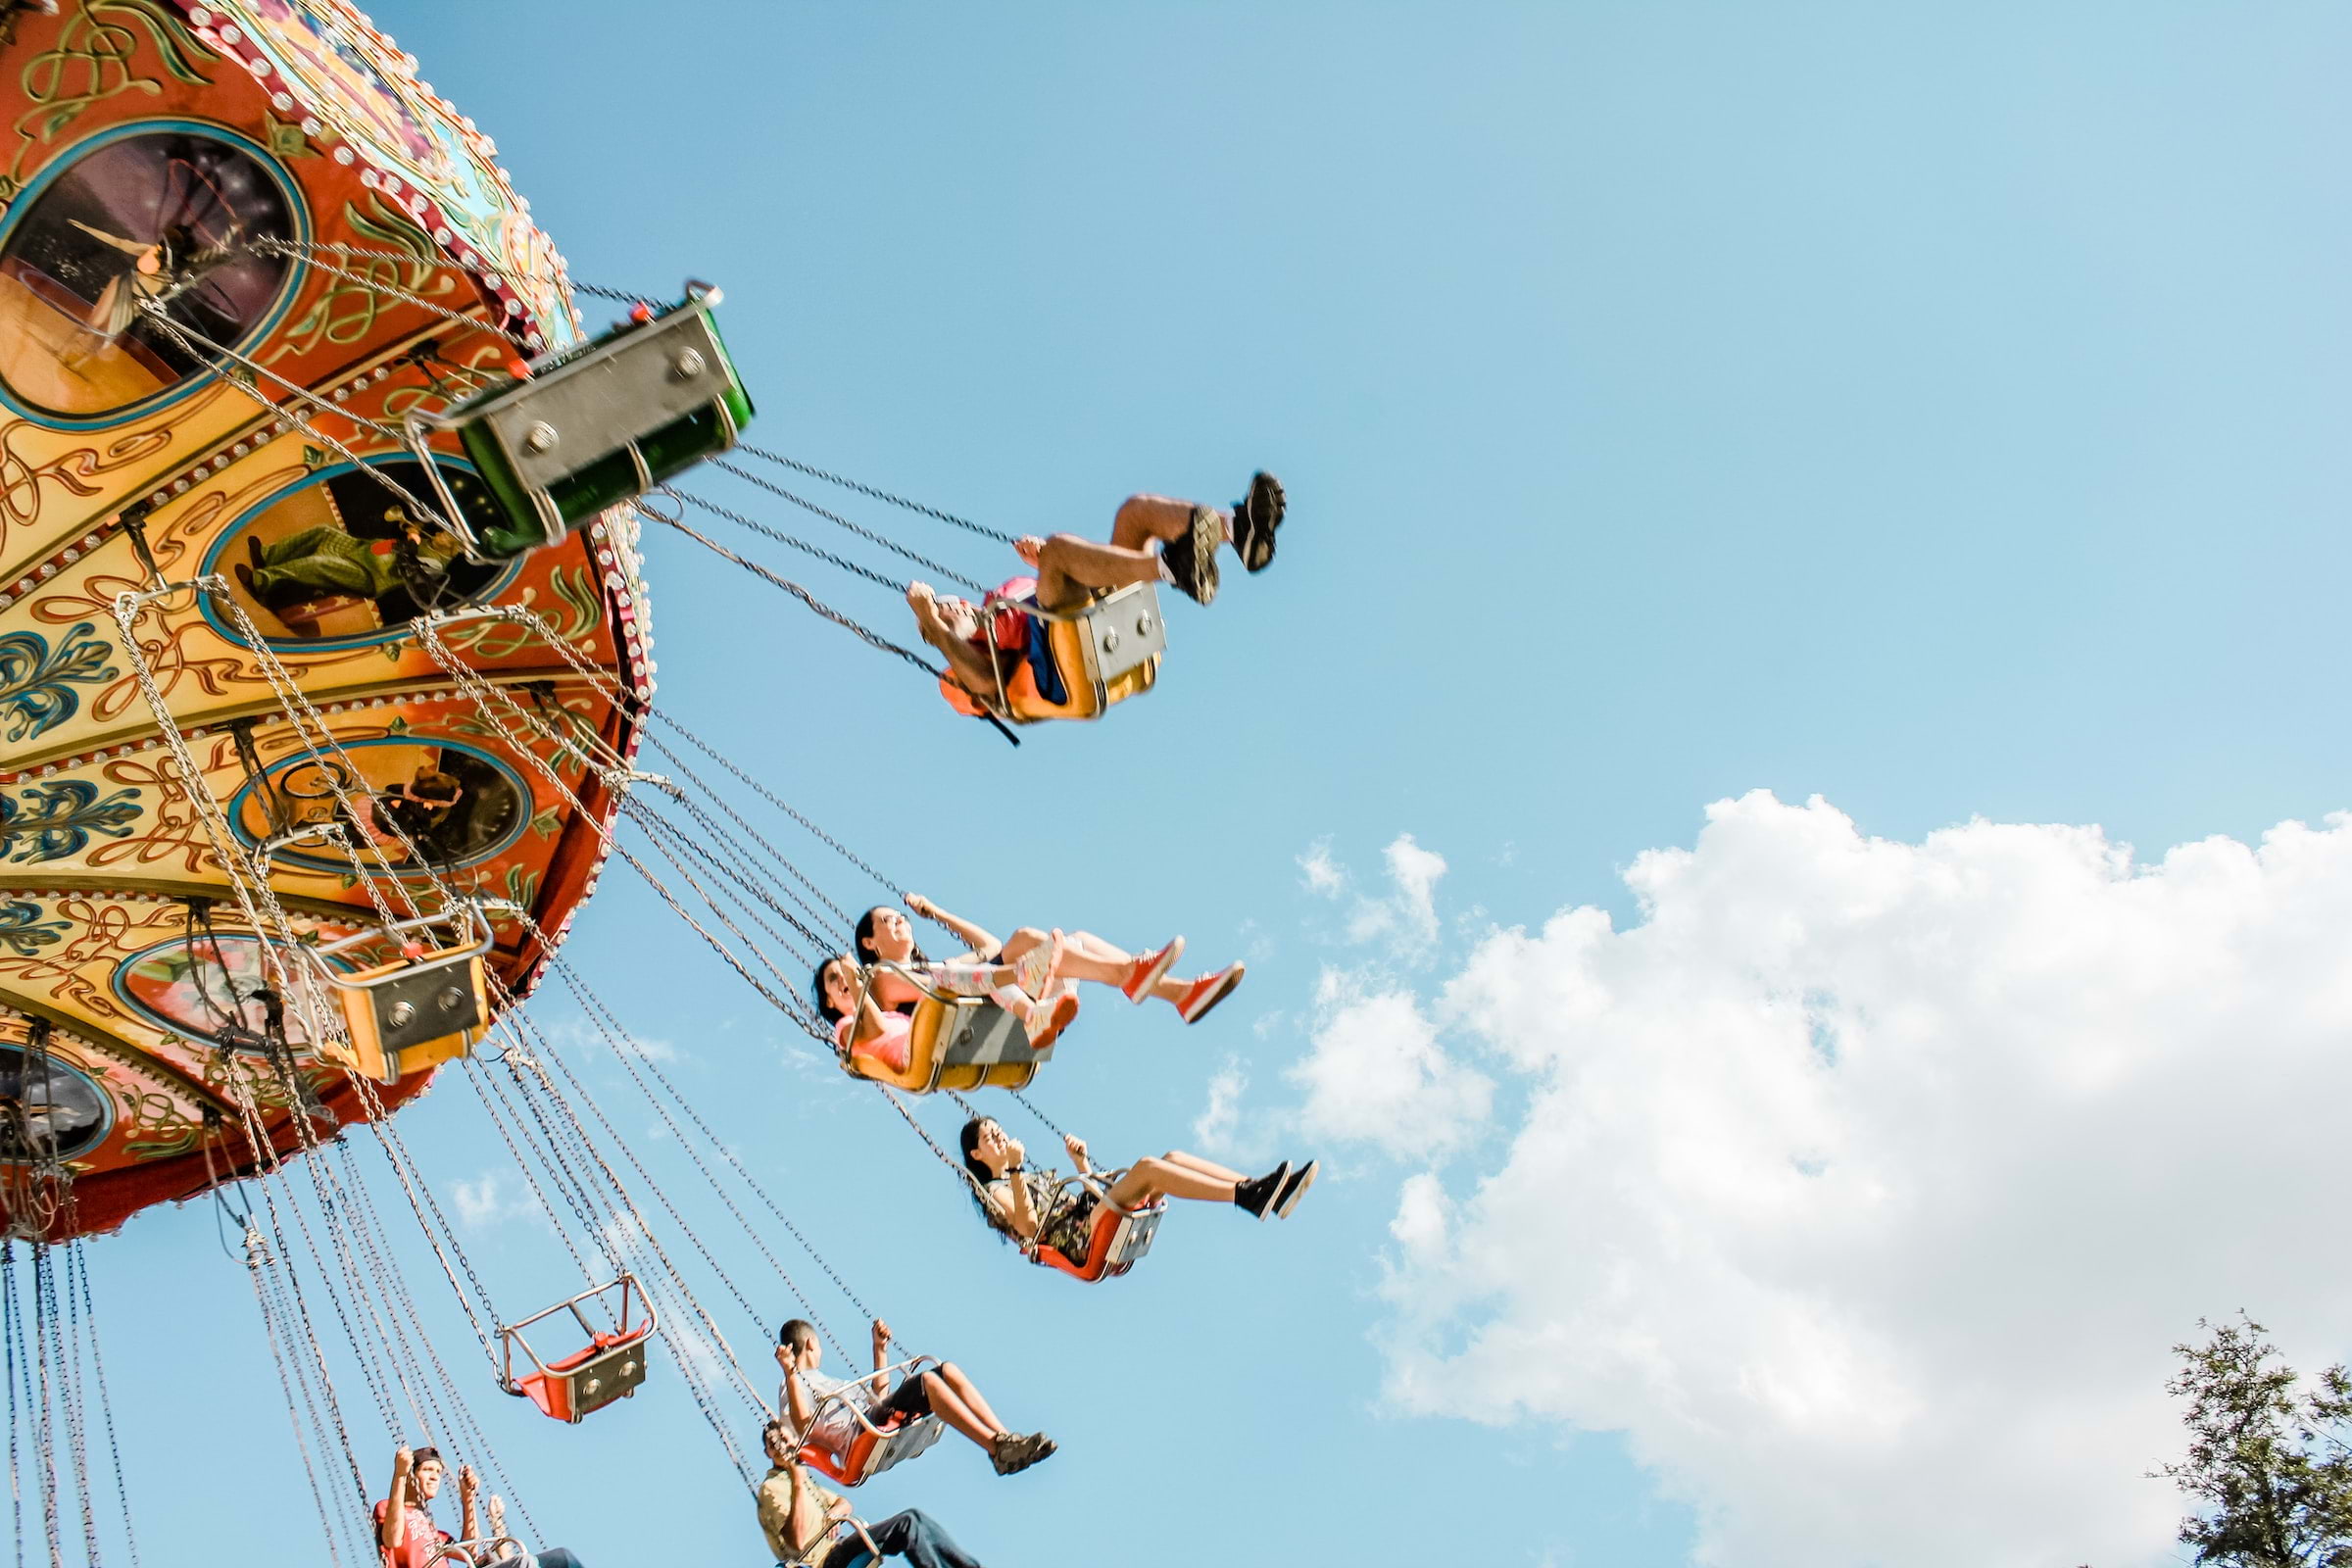 Guide to the best theme parks in and around London